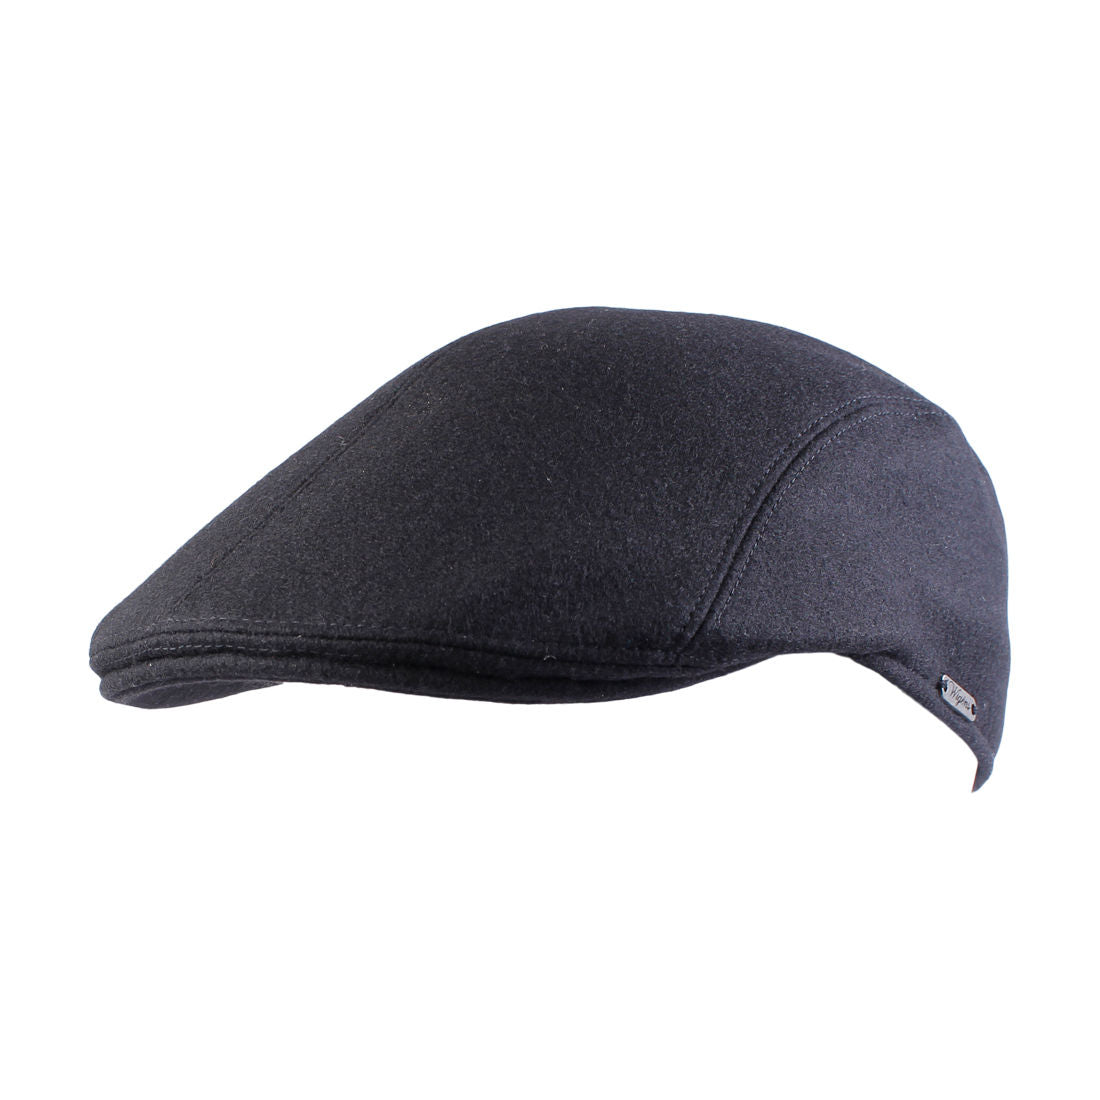 Melton Wool Ivy Modern Cap (Choice of Colors) by Wigens